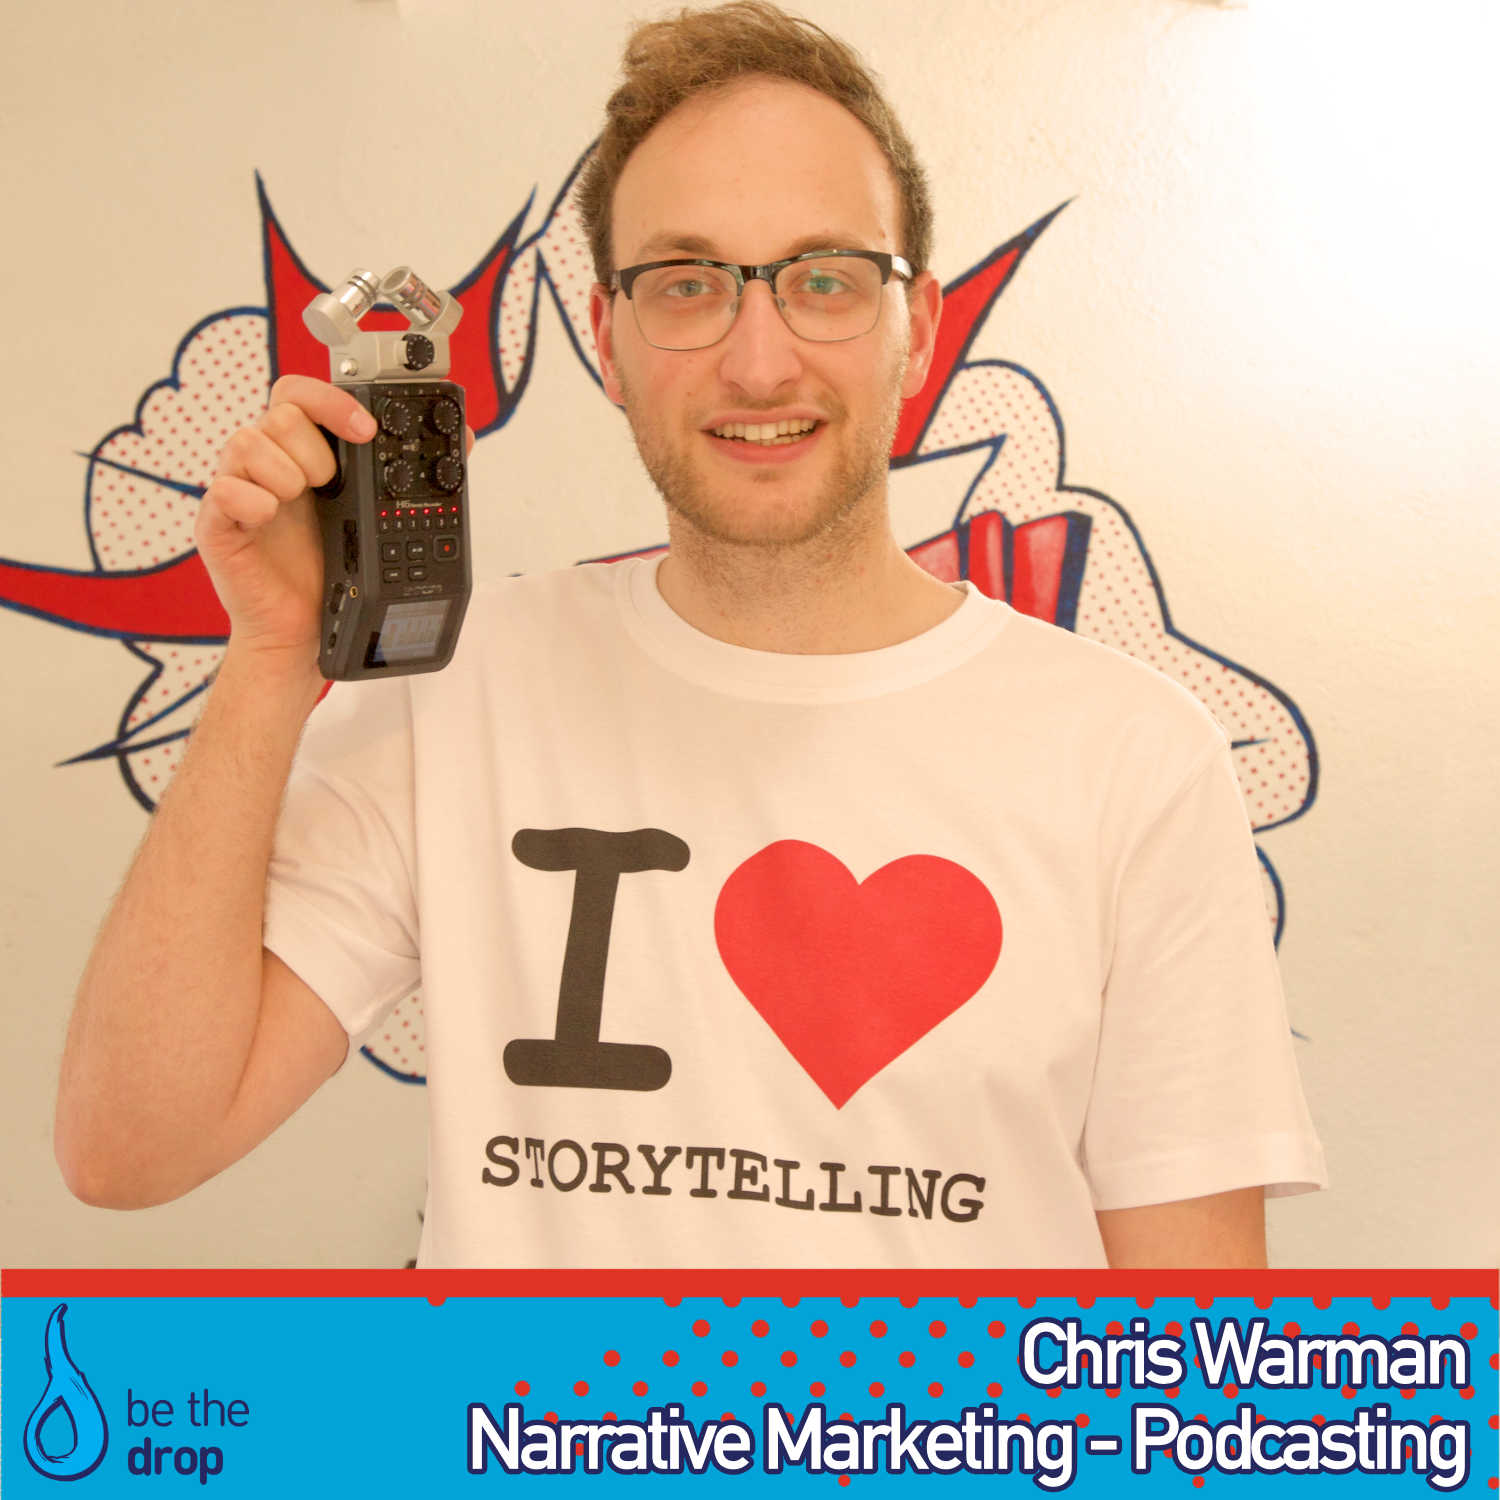 Chris Warman Discusses How To Make A Podcast